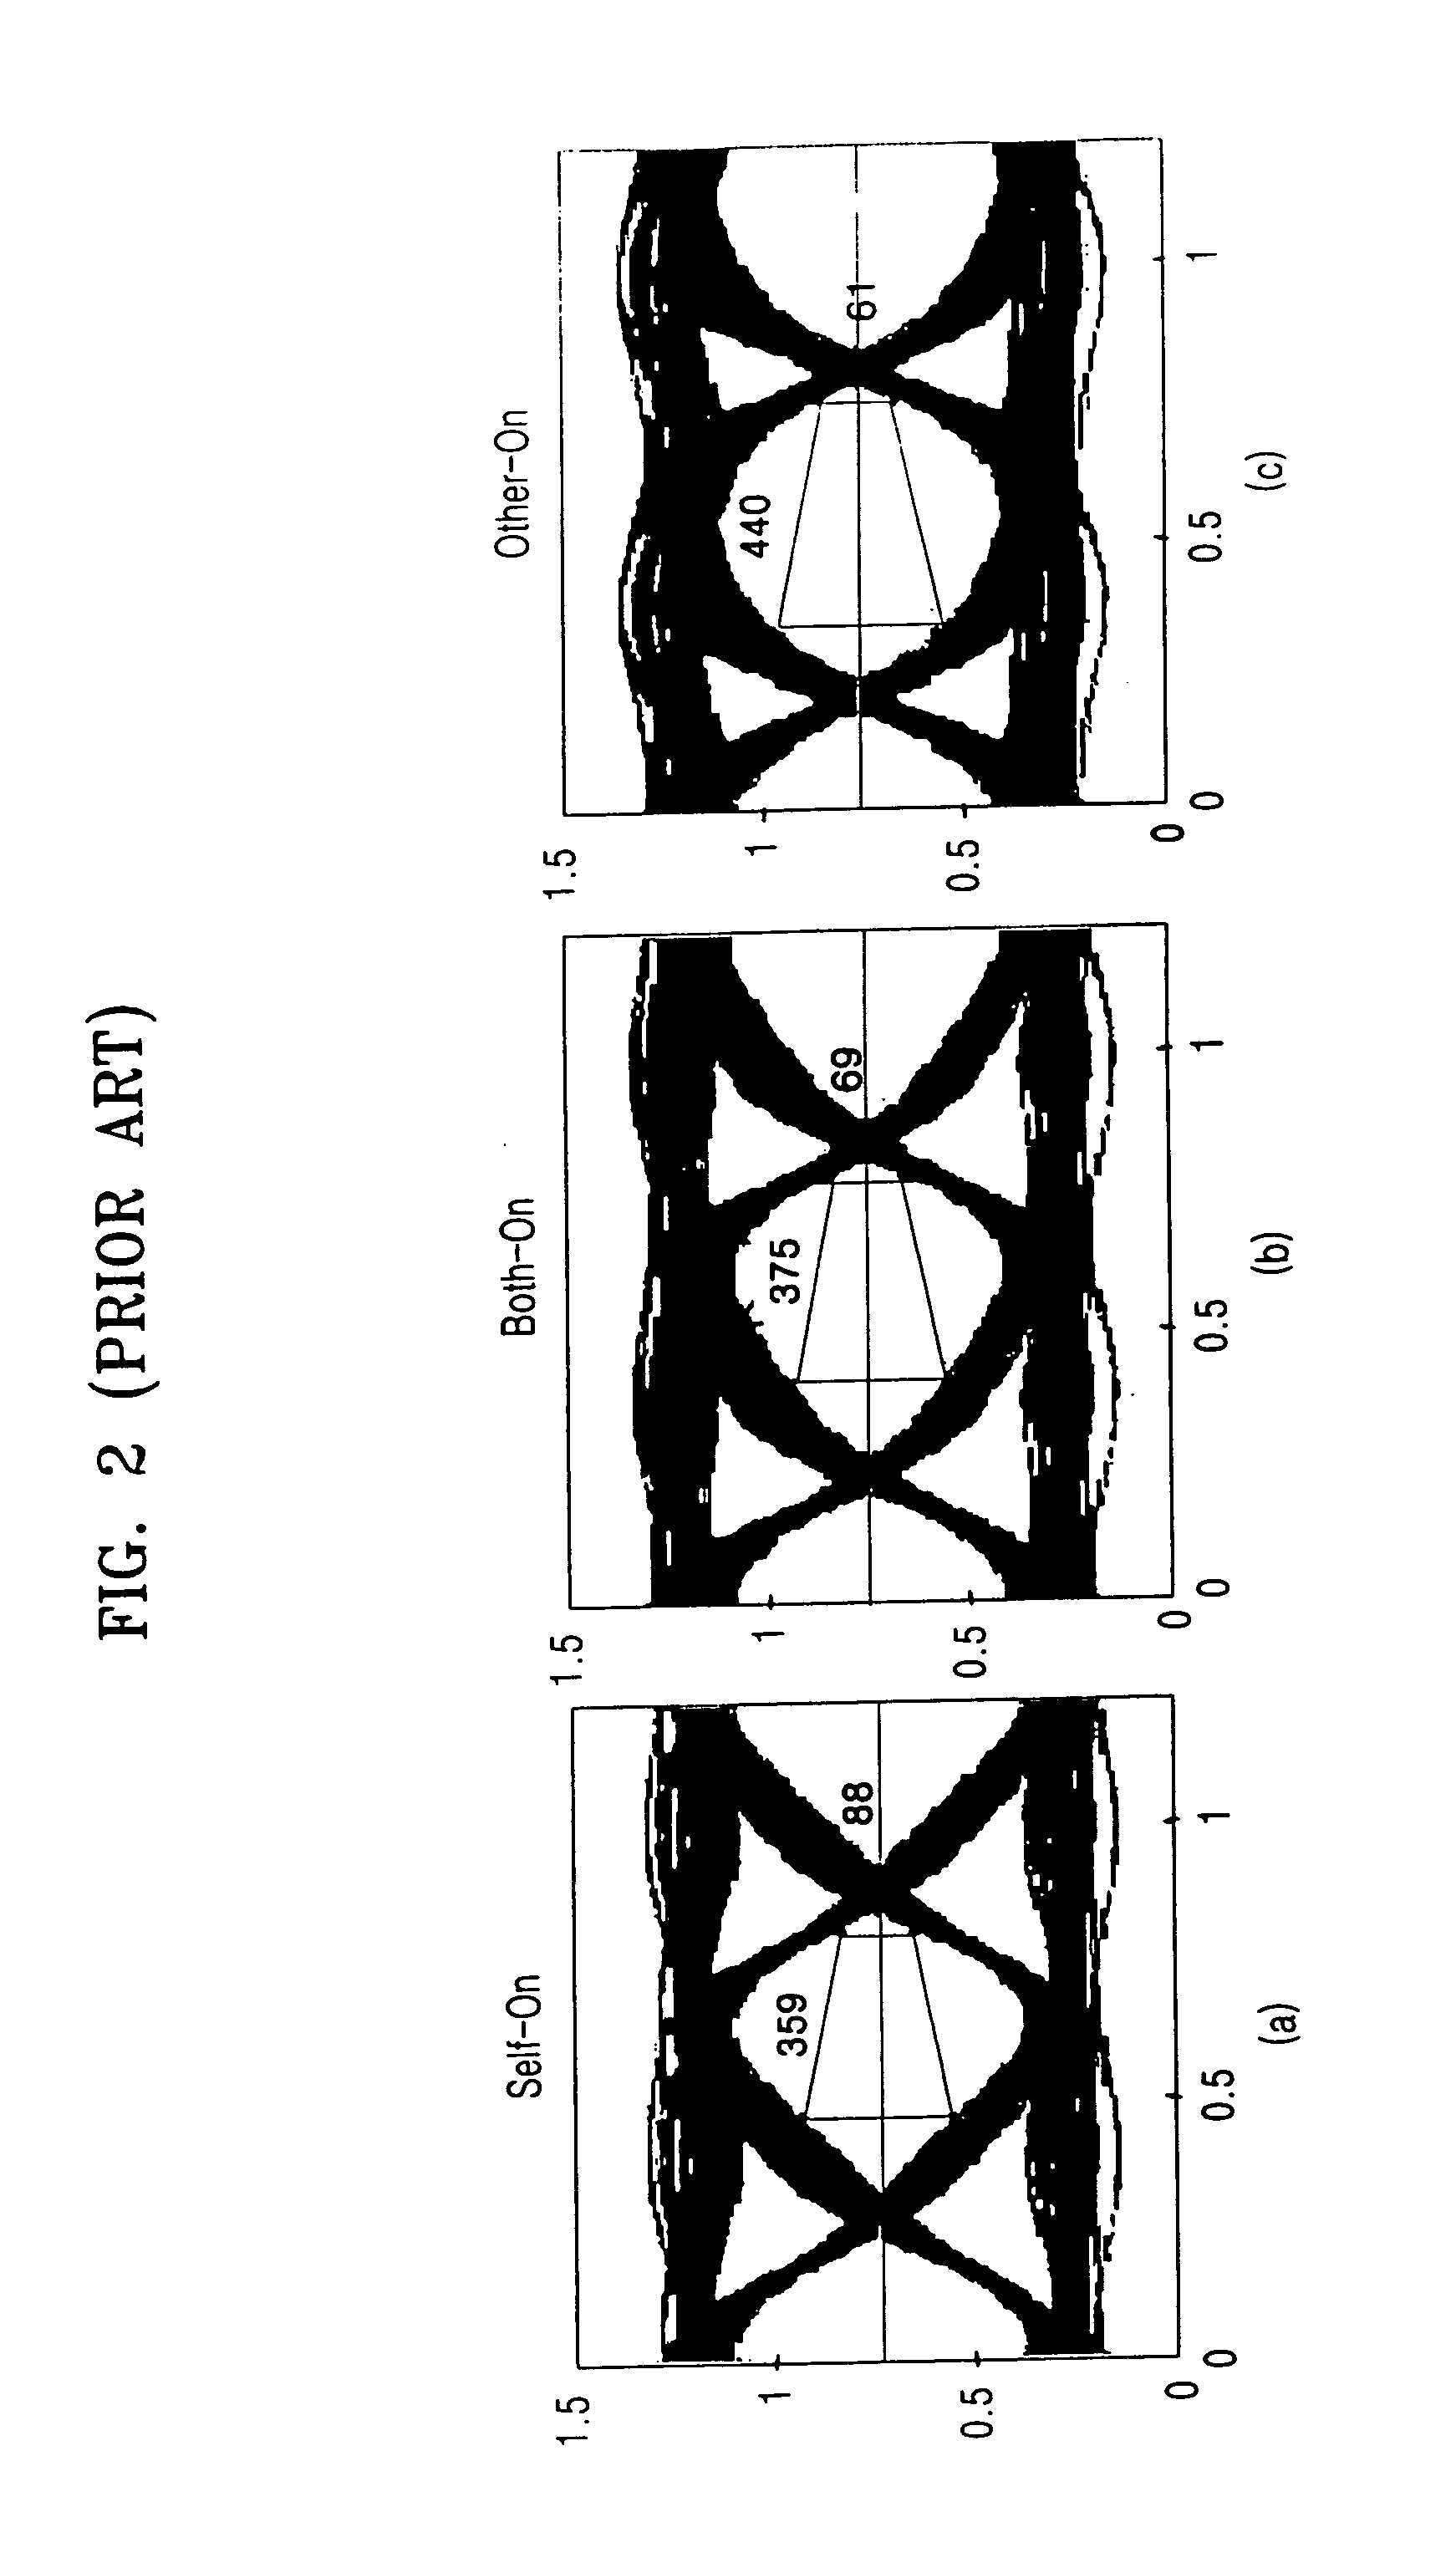 Memory module system with efficient control of on-die termination